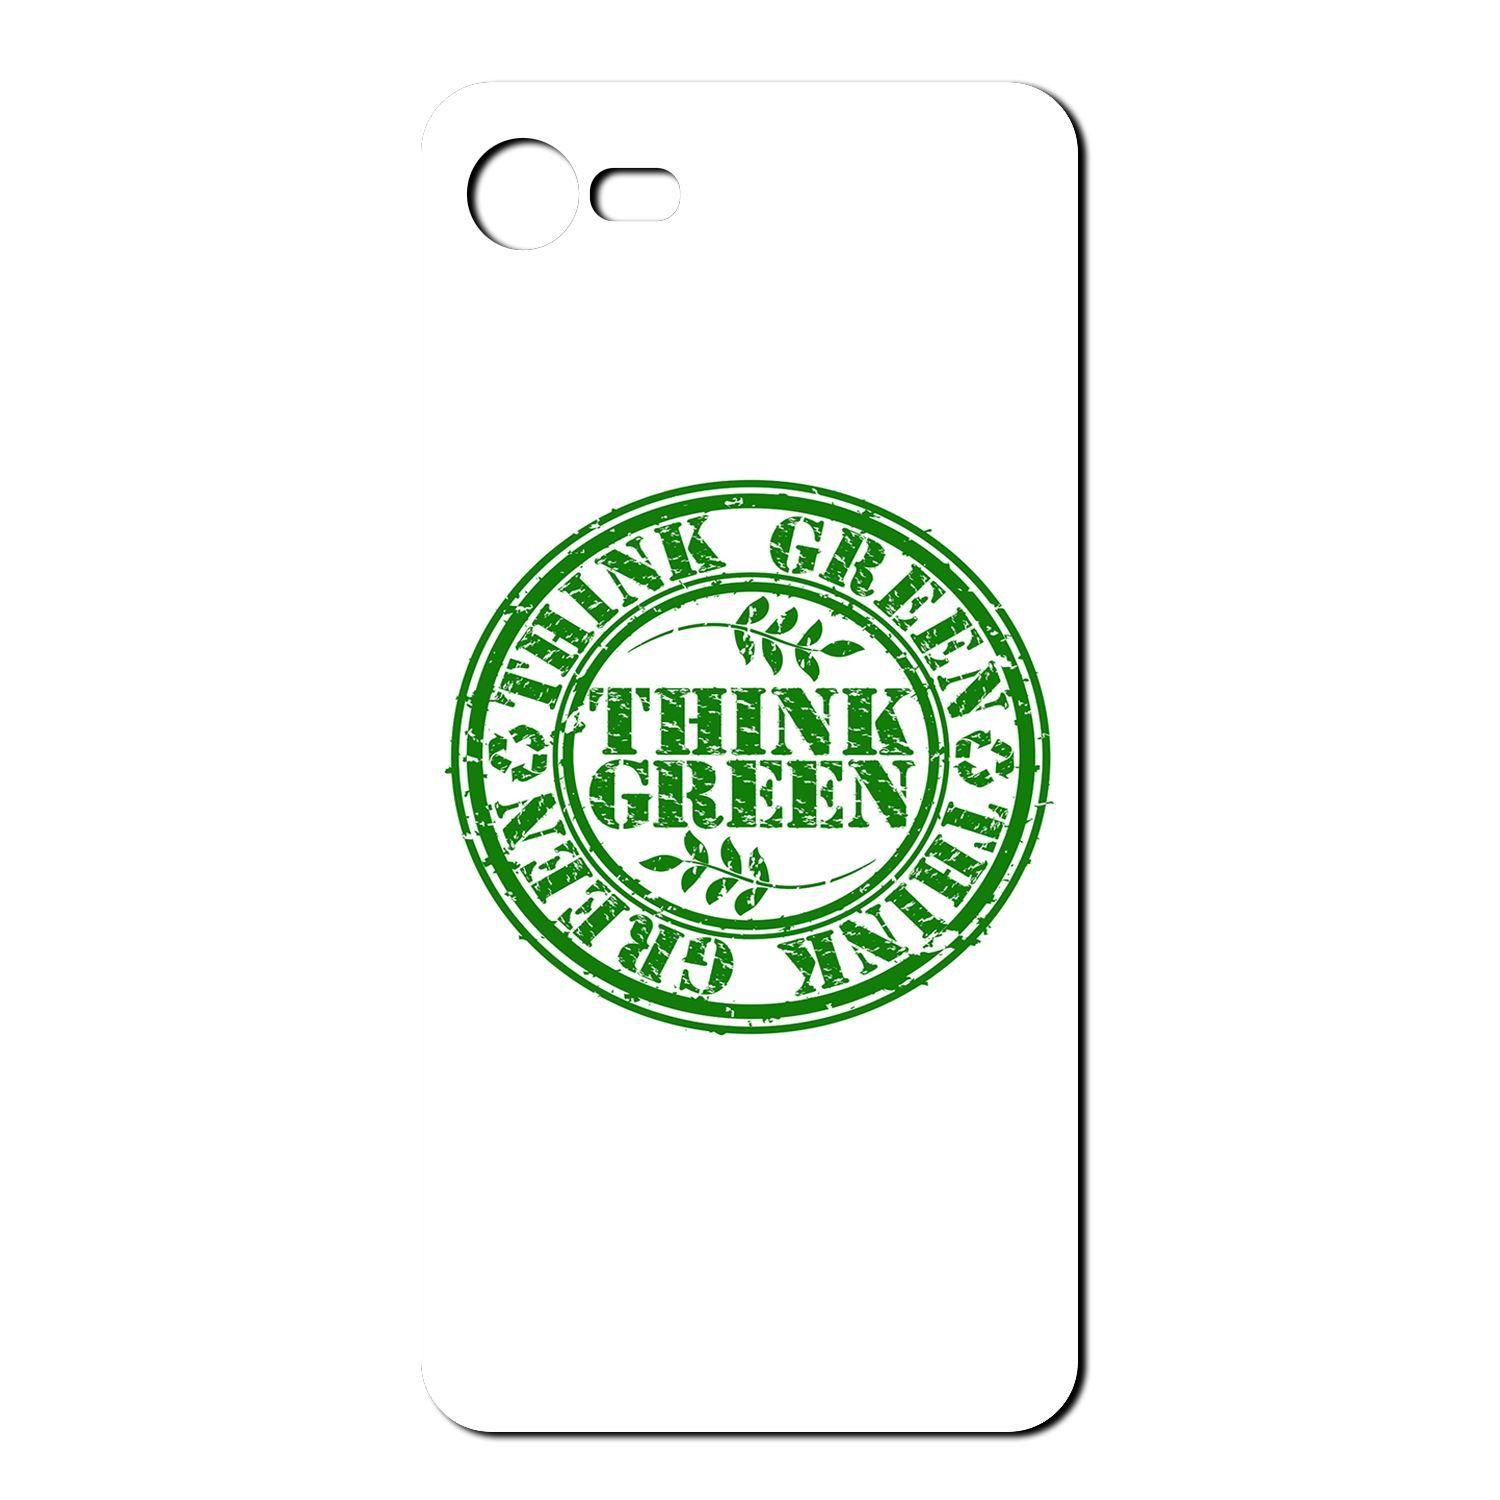 Eco-Friendly Green Logo - Eco Friendly Green TPU Back Case Cover For Mobile Phone - S5762 | eBay